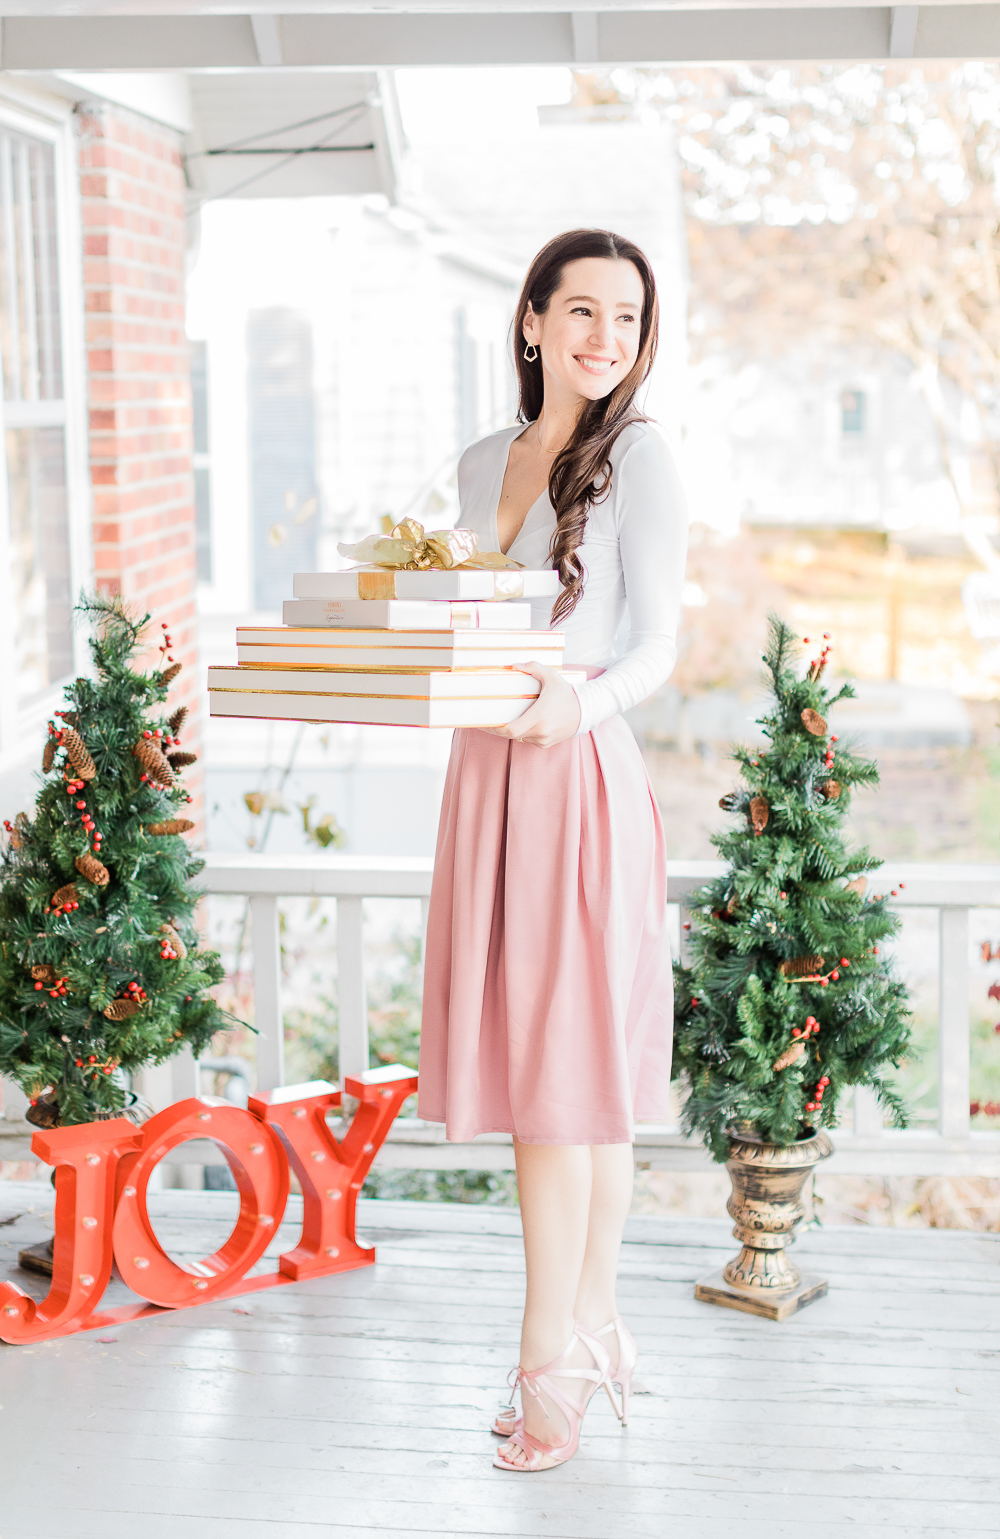 Kate Spade Inspired Holiday Outfit, girl holding gold and white presents, gold and white wrapping, Amazon pink bow skirt, preppy holiday outfit idea, pink nina dress sandals, popular affordable fashion blogger Stephanie Ziajka, popular affordable fashion blog Diary of a Debutante